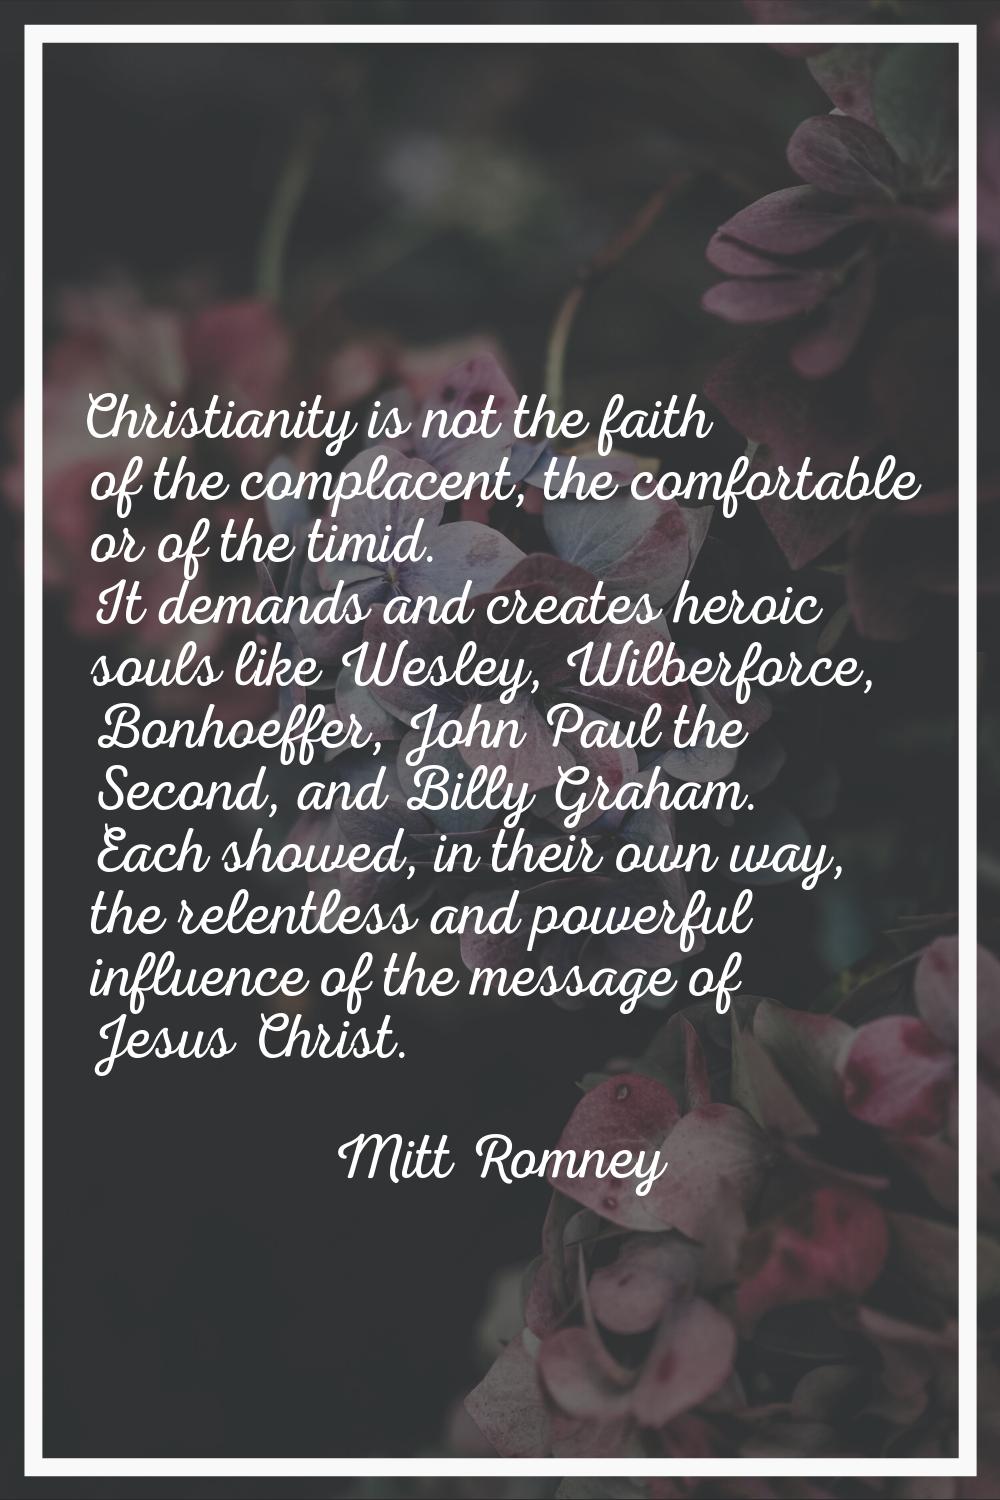 Christianity is not the faith of the complacent, the comfortable or of the timid. It demands and cr